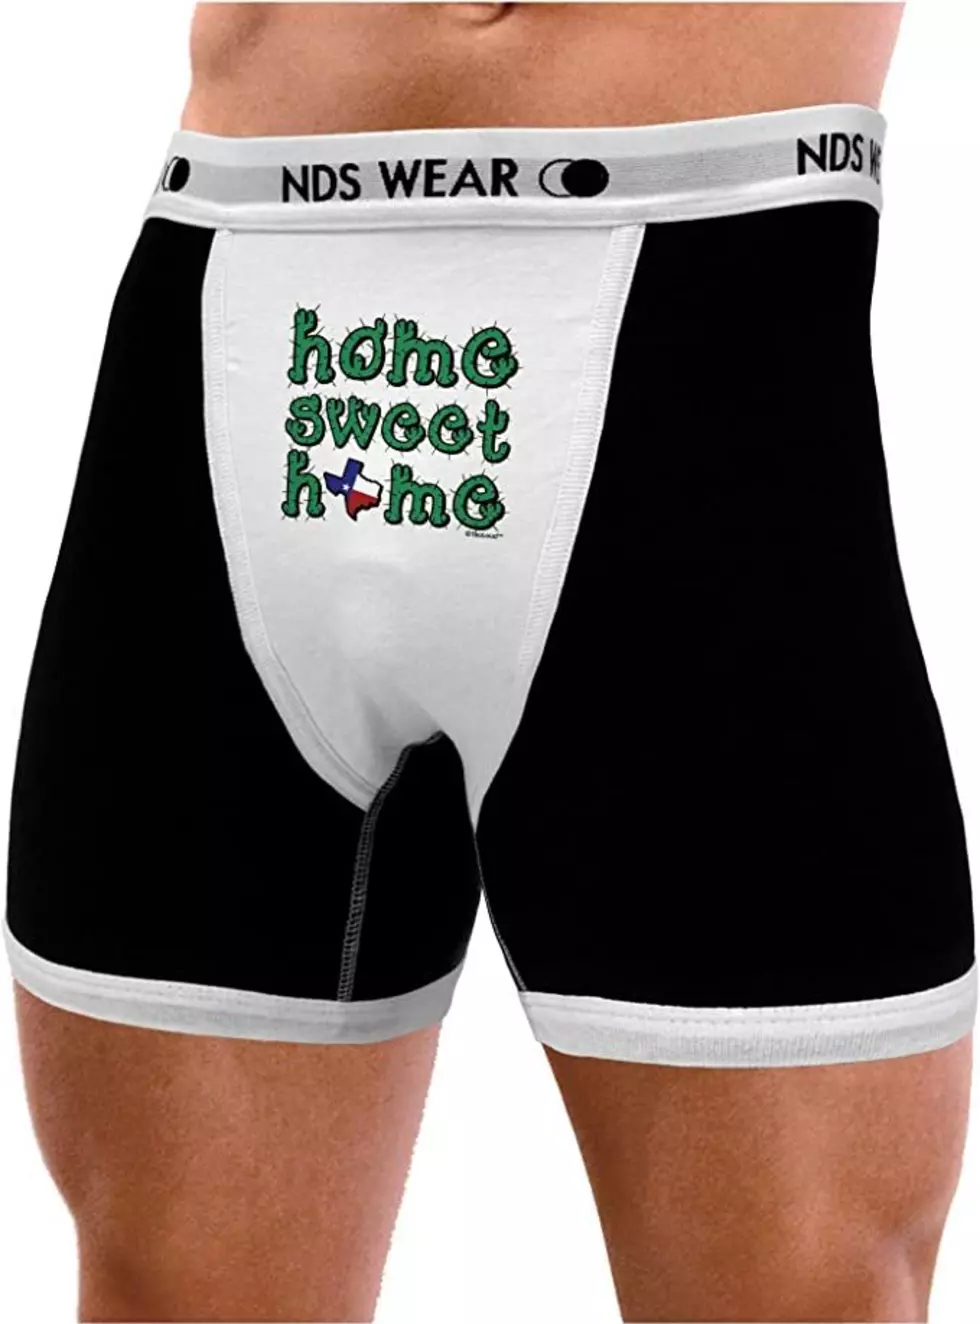 Check Out The Ultimate Collection Of Texas Proud Underwear And Swimwear